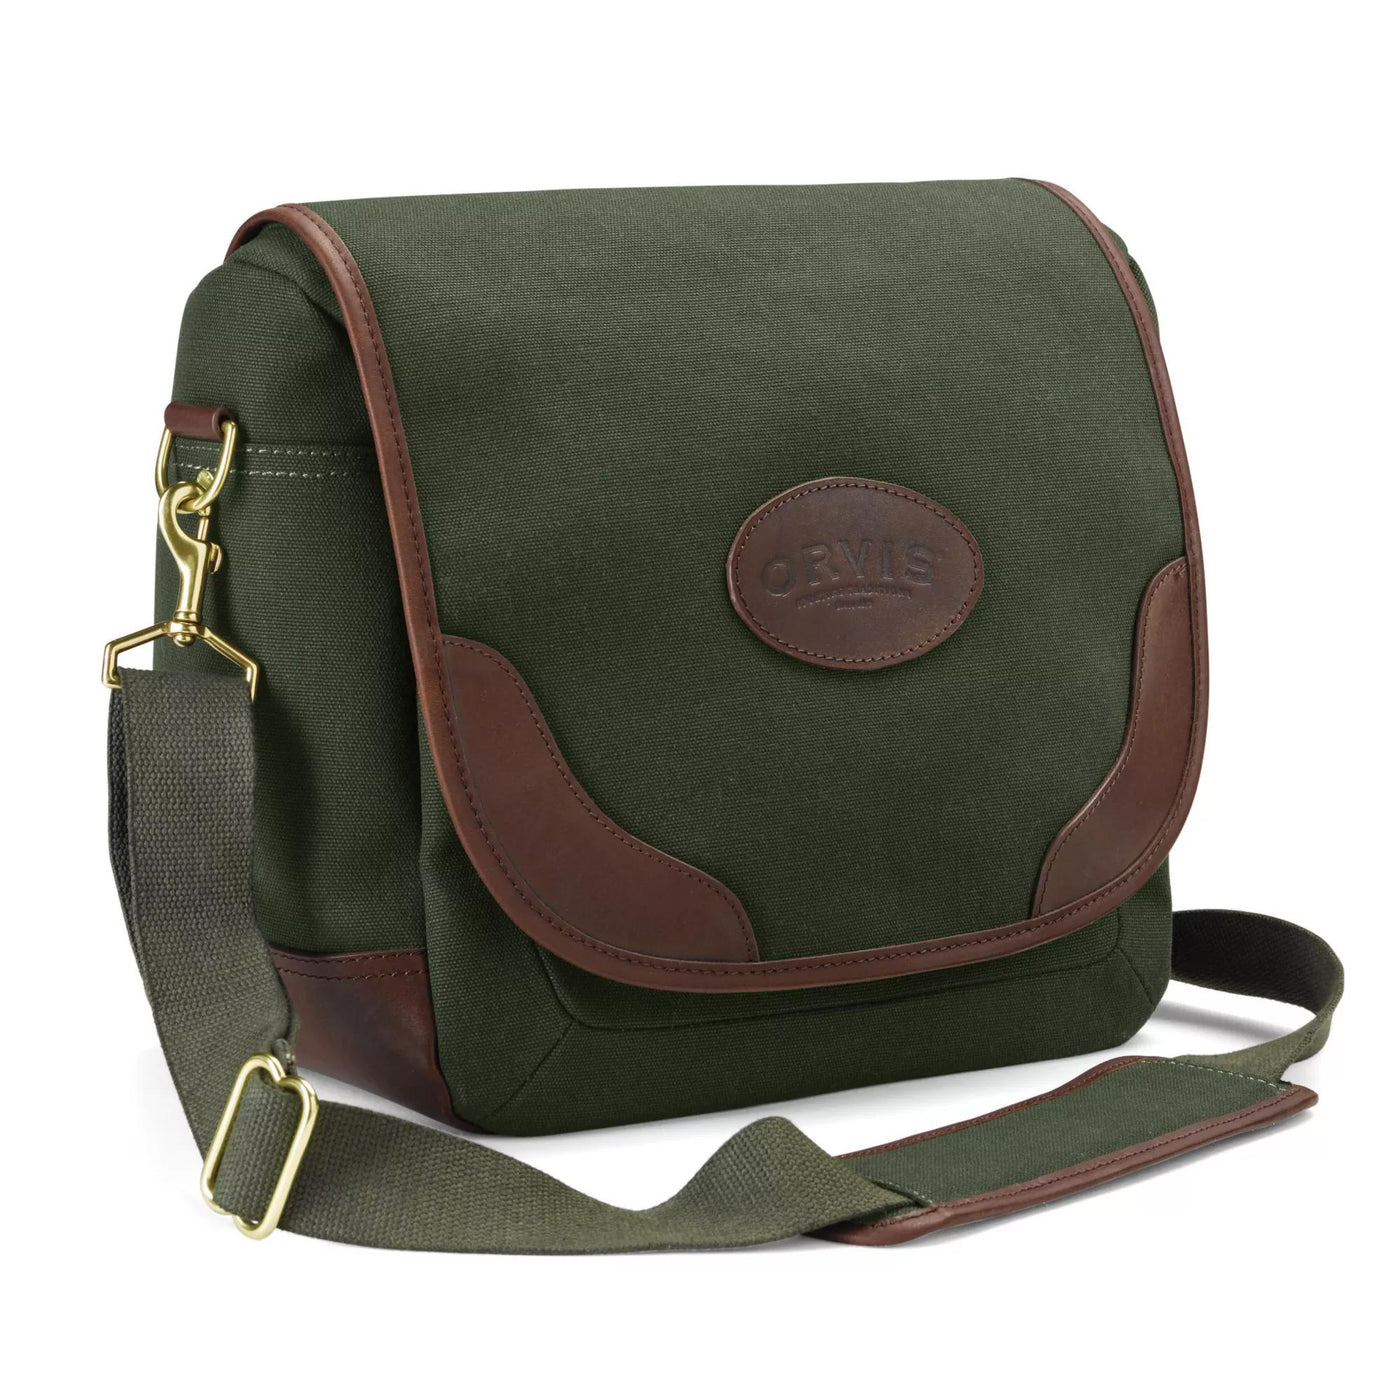 Orvis Battenkill Shoulder Bag-HUNTING/OUTDOORS-Green/Brown-Kevin's Fine Outdoor Gear & Apparel